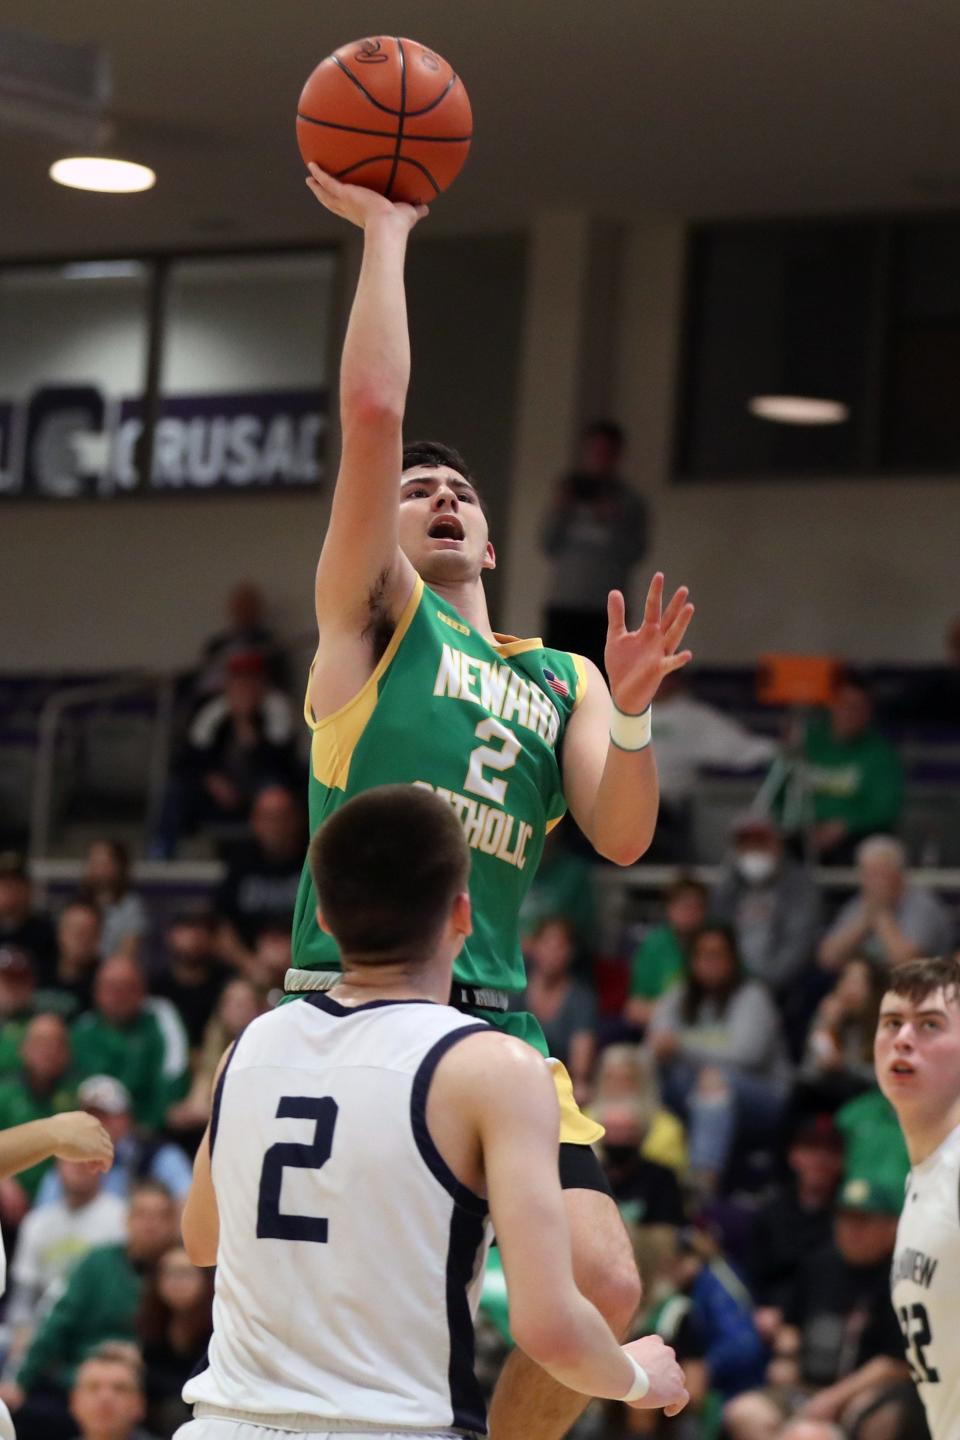 Newark Catholic senior Cole Canter was named to the All-Ohio Division IV third team on Monday.